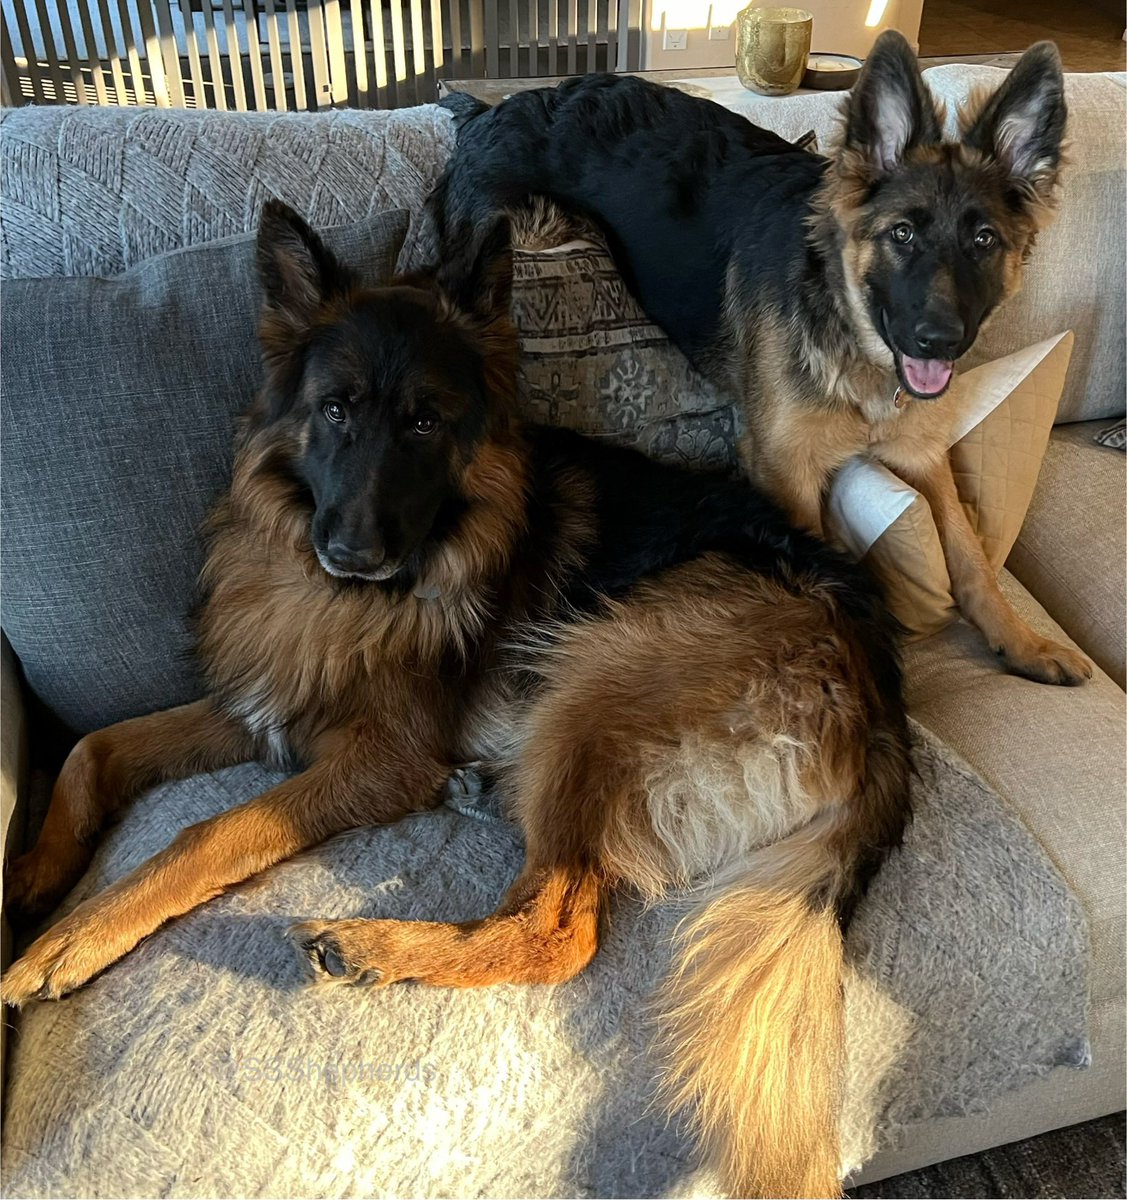 #ThatFeelingWhen your little sister suddenly flies across the room and up into the sofa with you… #WackyWednesday #dogsofx #dogsoftwitter
 #SuttonlovesSaryn 🥰🐾